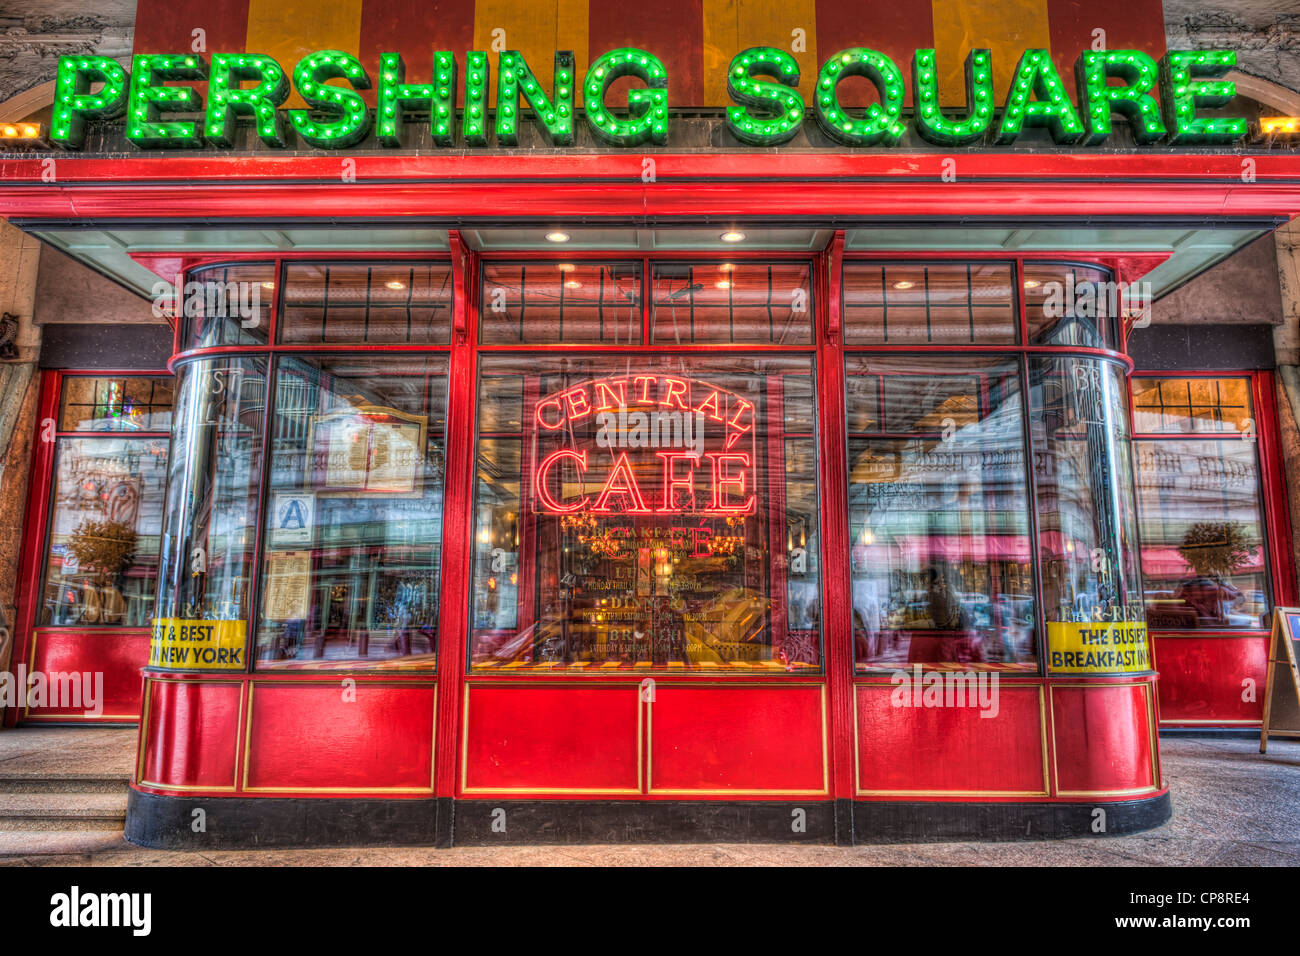 Pershing Square Central Cafe, located on 42nd street under the Park Avenue Viaduct in New York City. Stock Photo